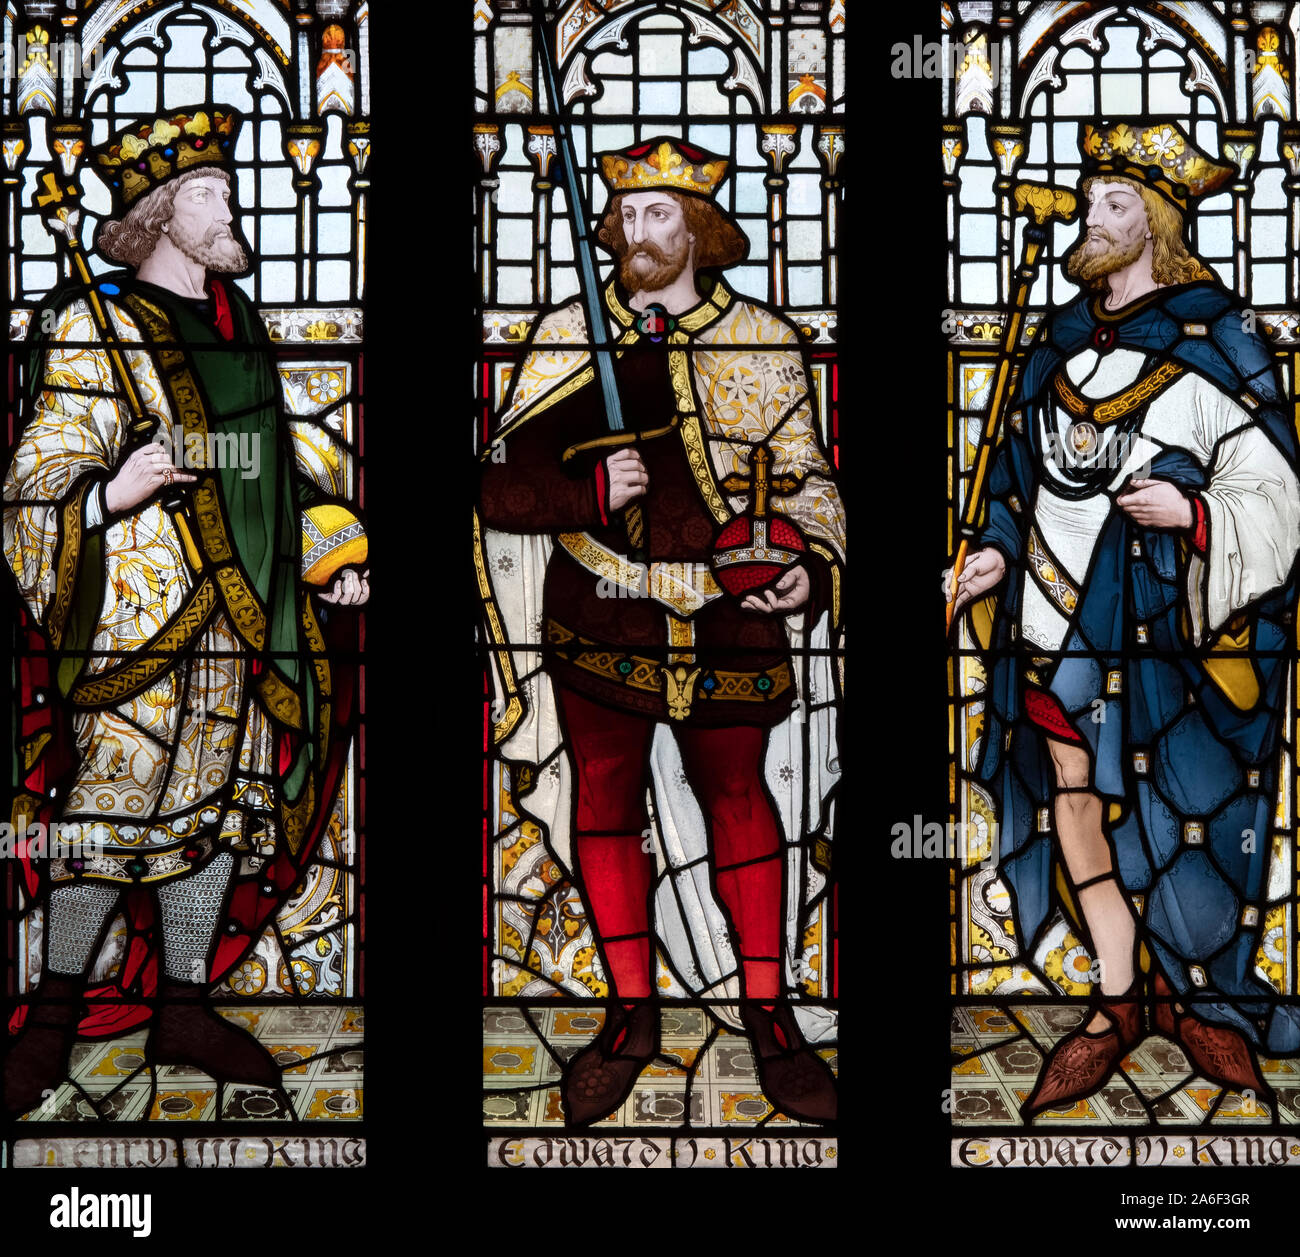 13th and 14th century English Monarchs depicted by Heaton, Butler and Bayne, Rochdale Town Hall, Greater Manchester, UK Stock Photo